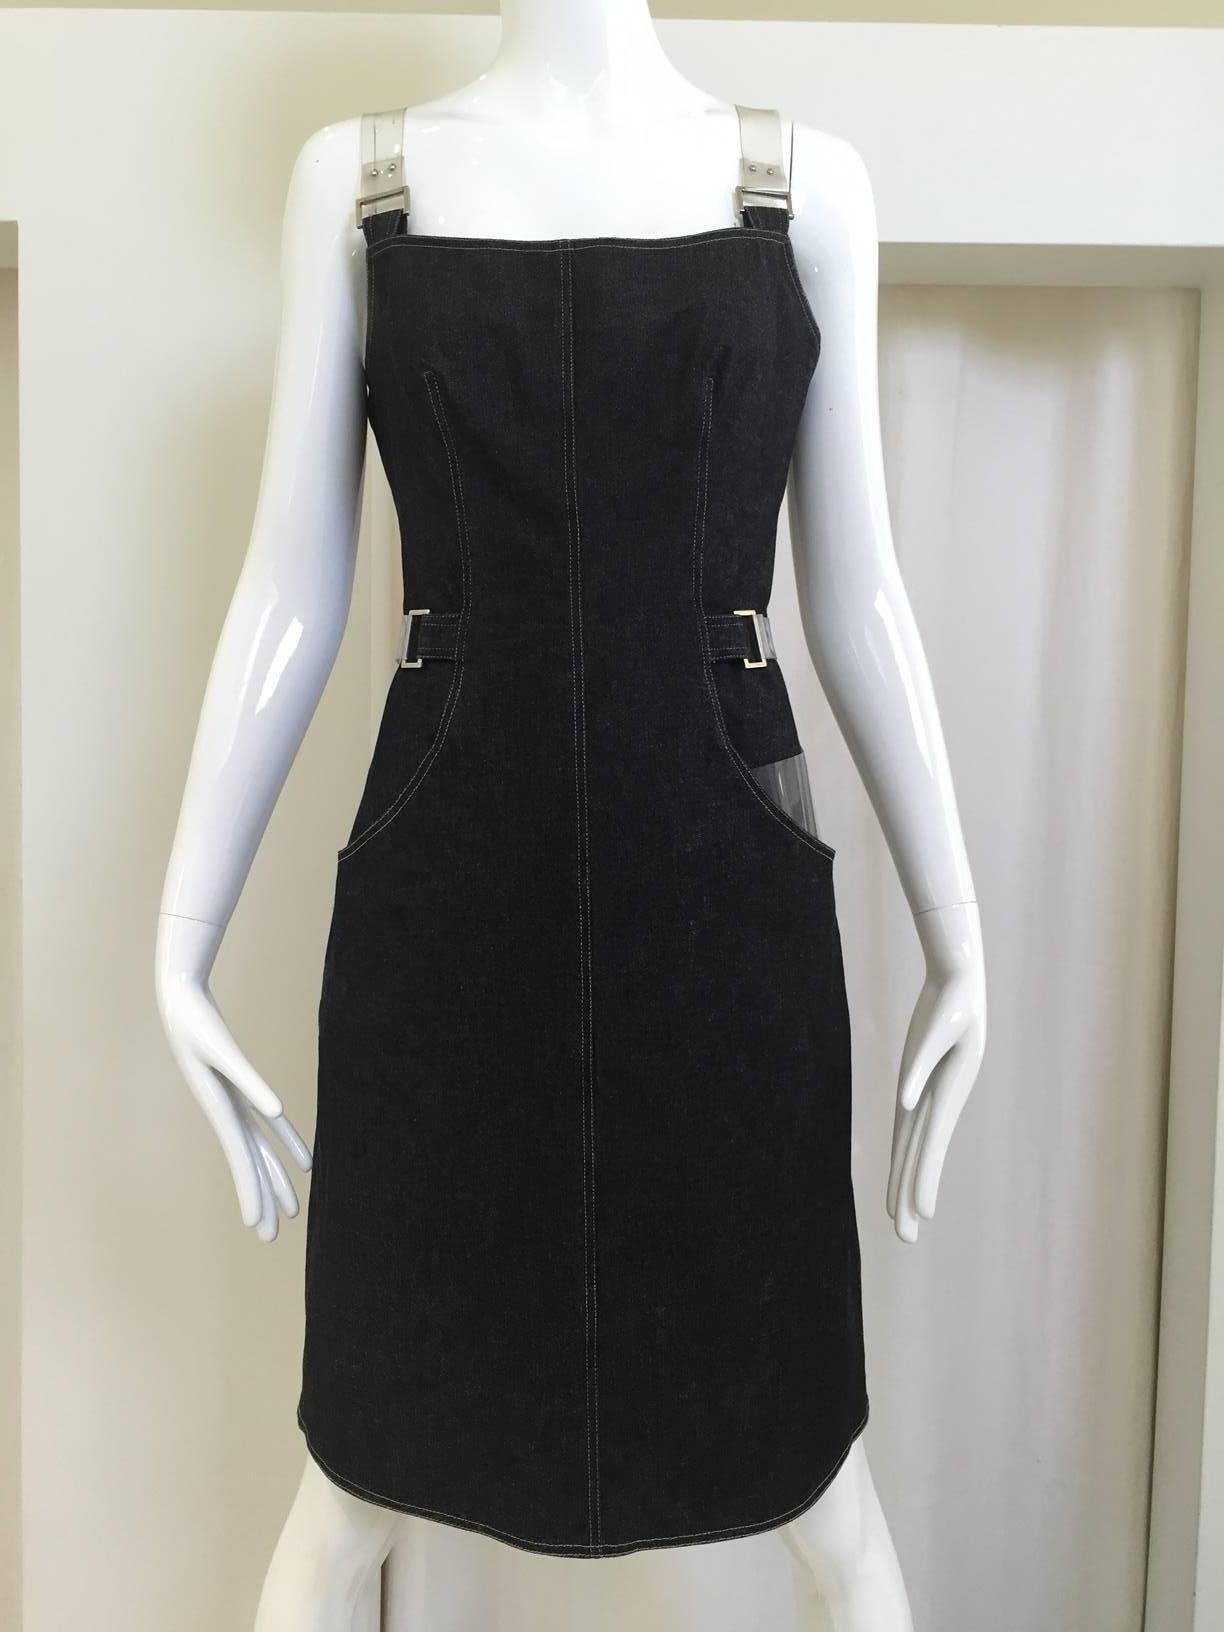 Women's  Paco Rabanne denim dress with clear plastic strap and belt